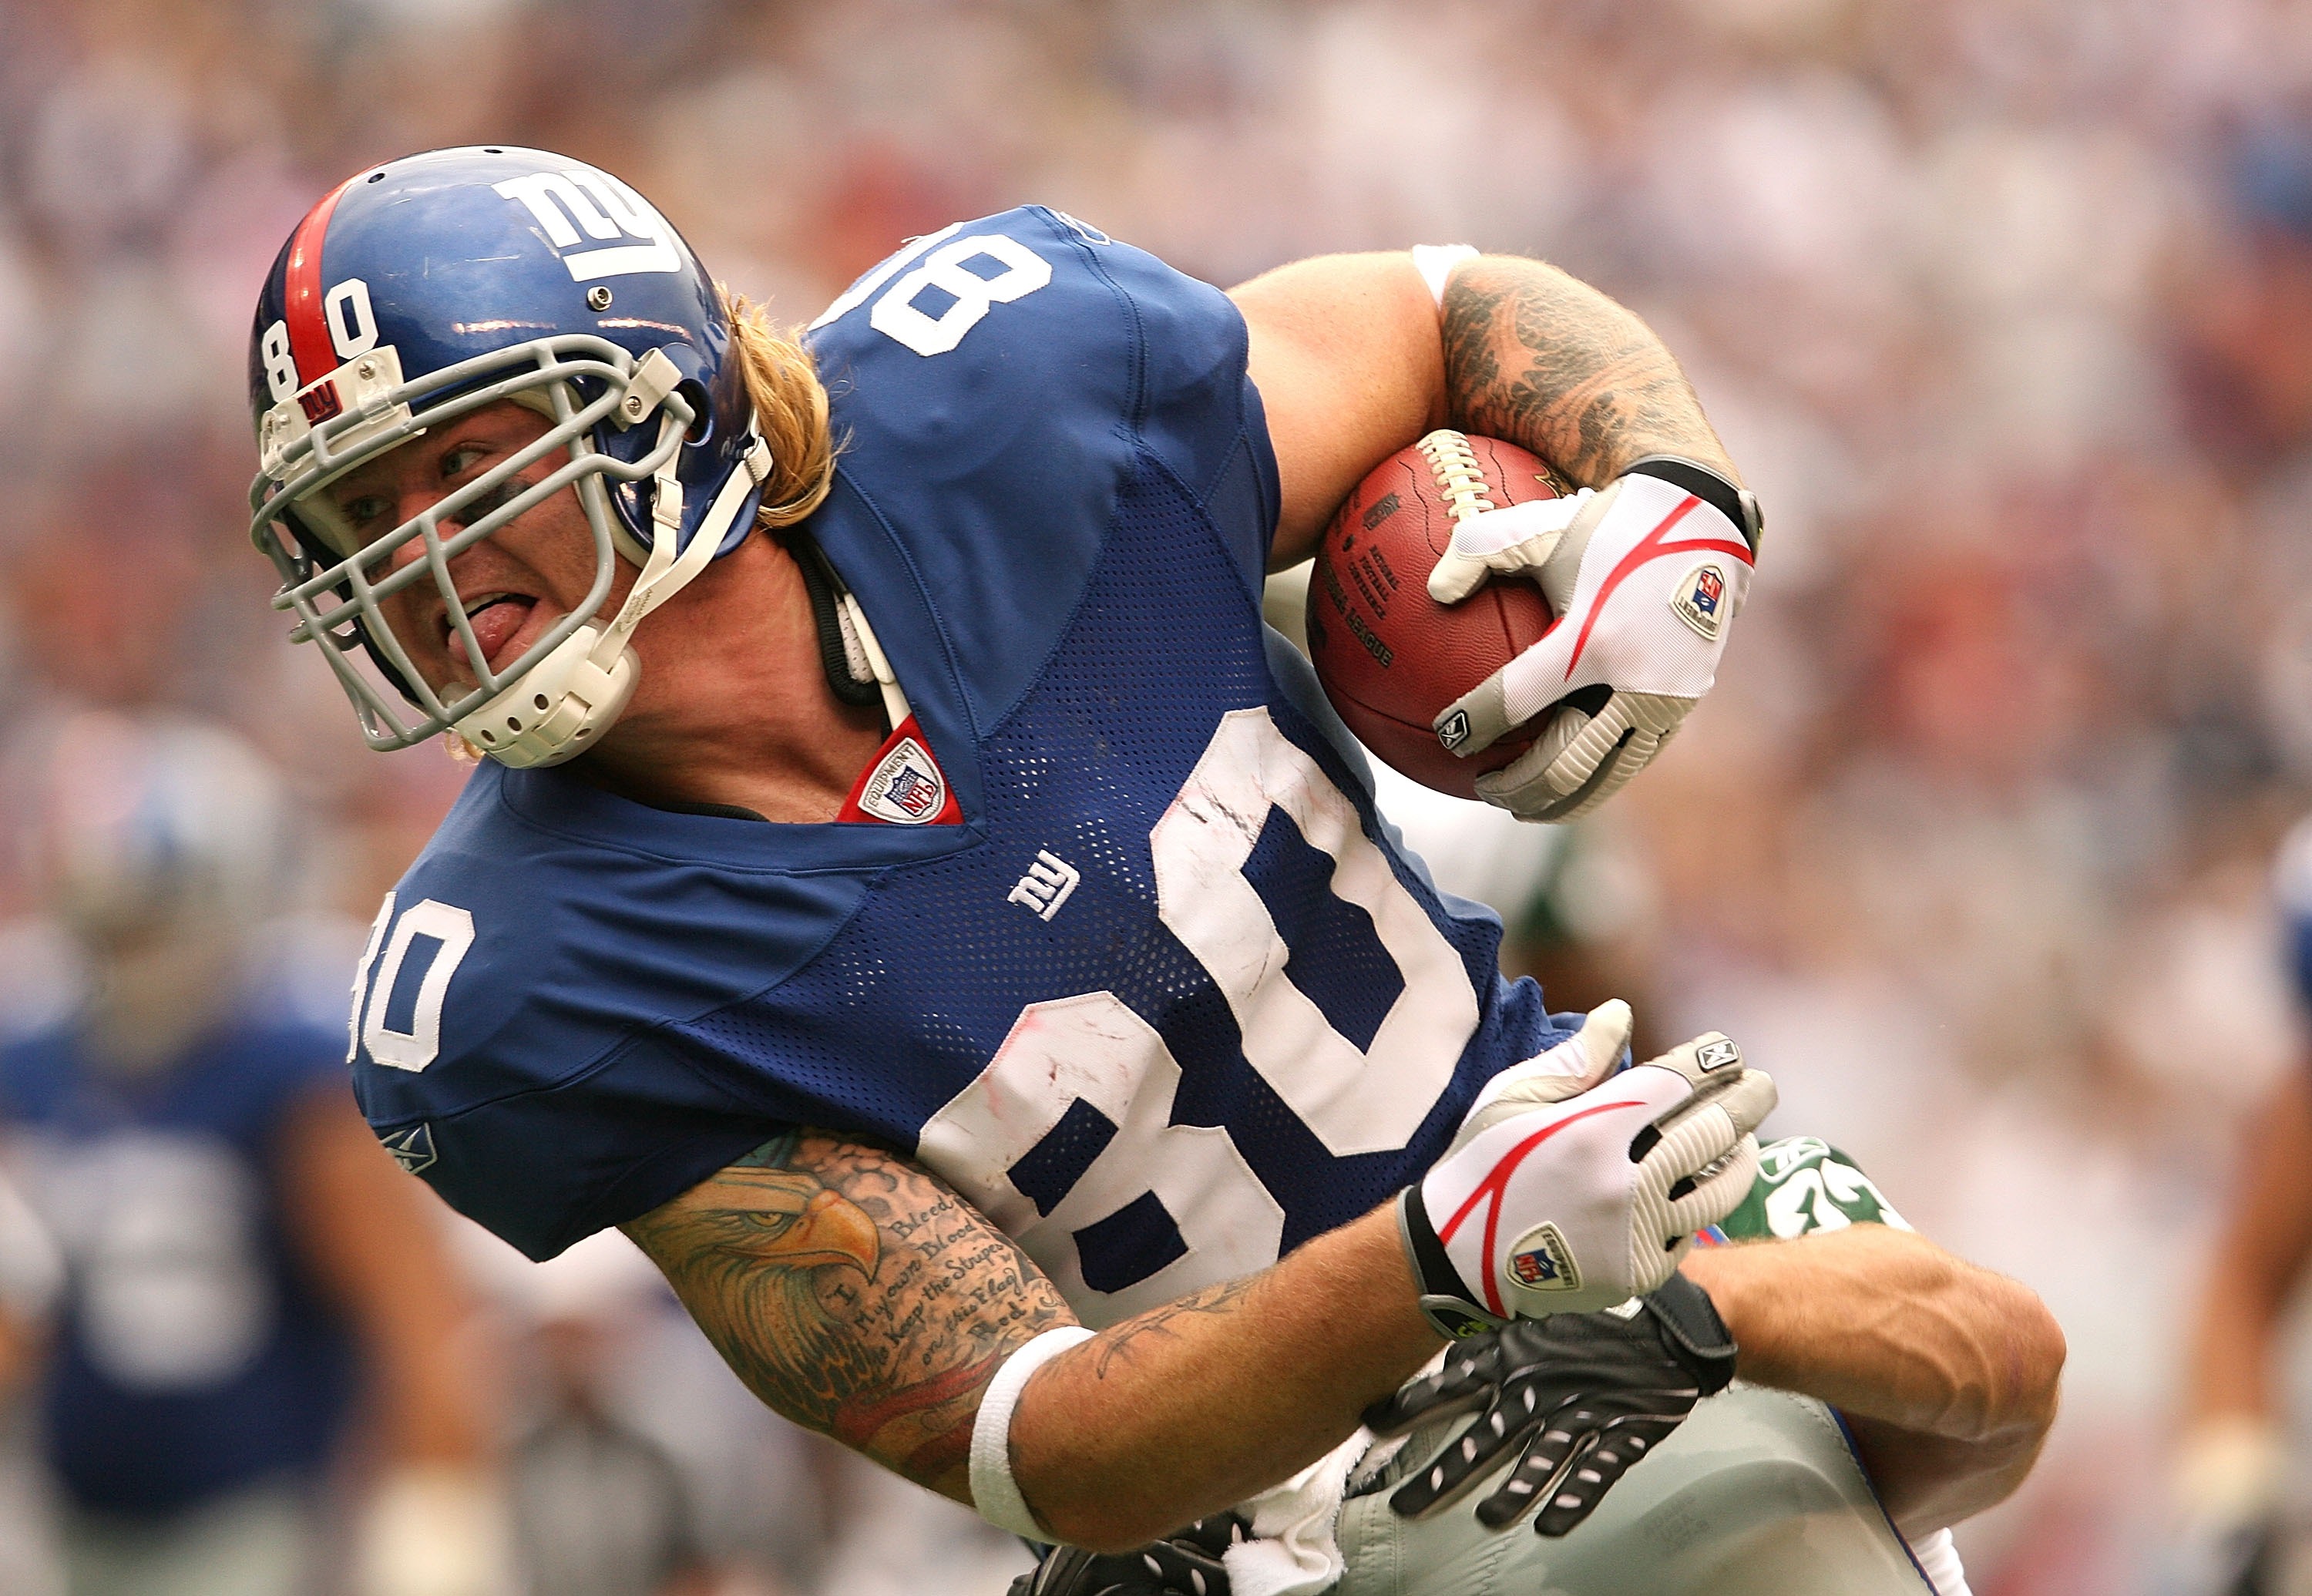 Former New York Giants star Jeremy Shockey was one of the league's most productive tight ends in his prime.